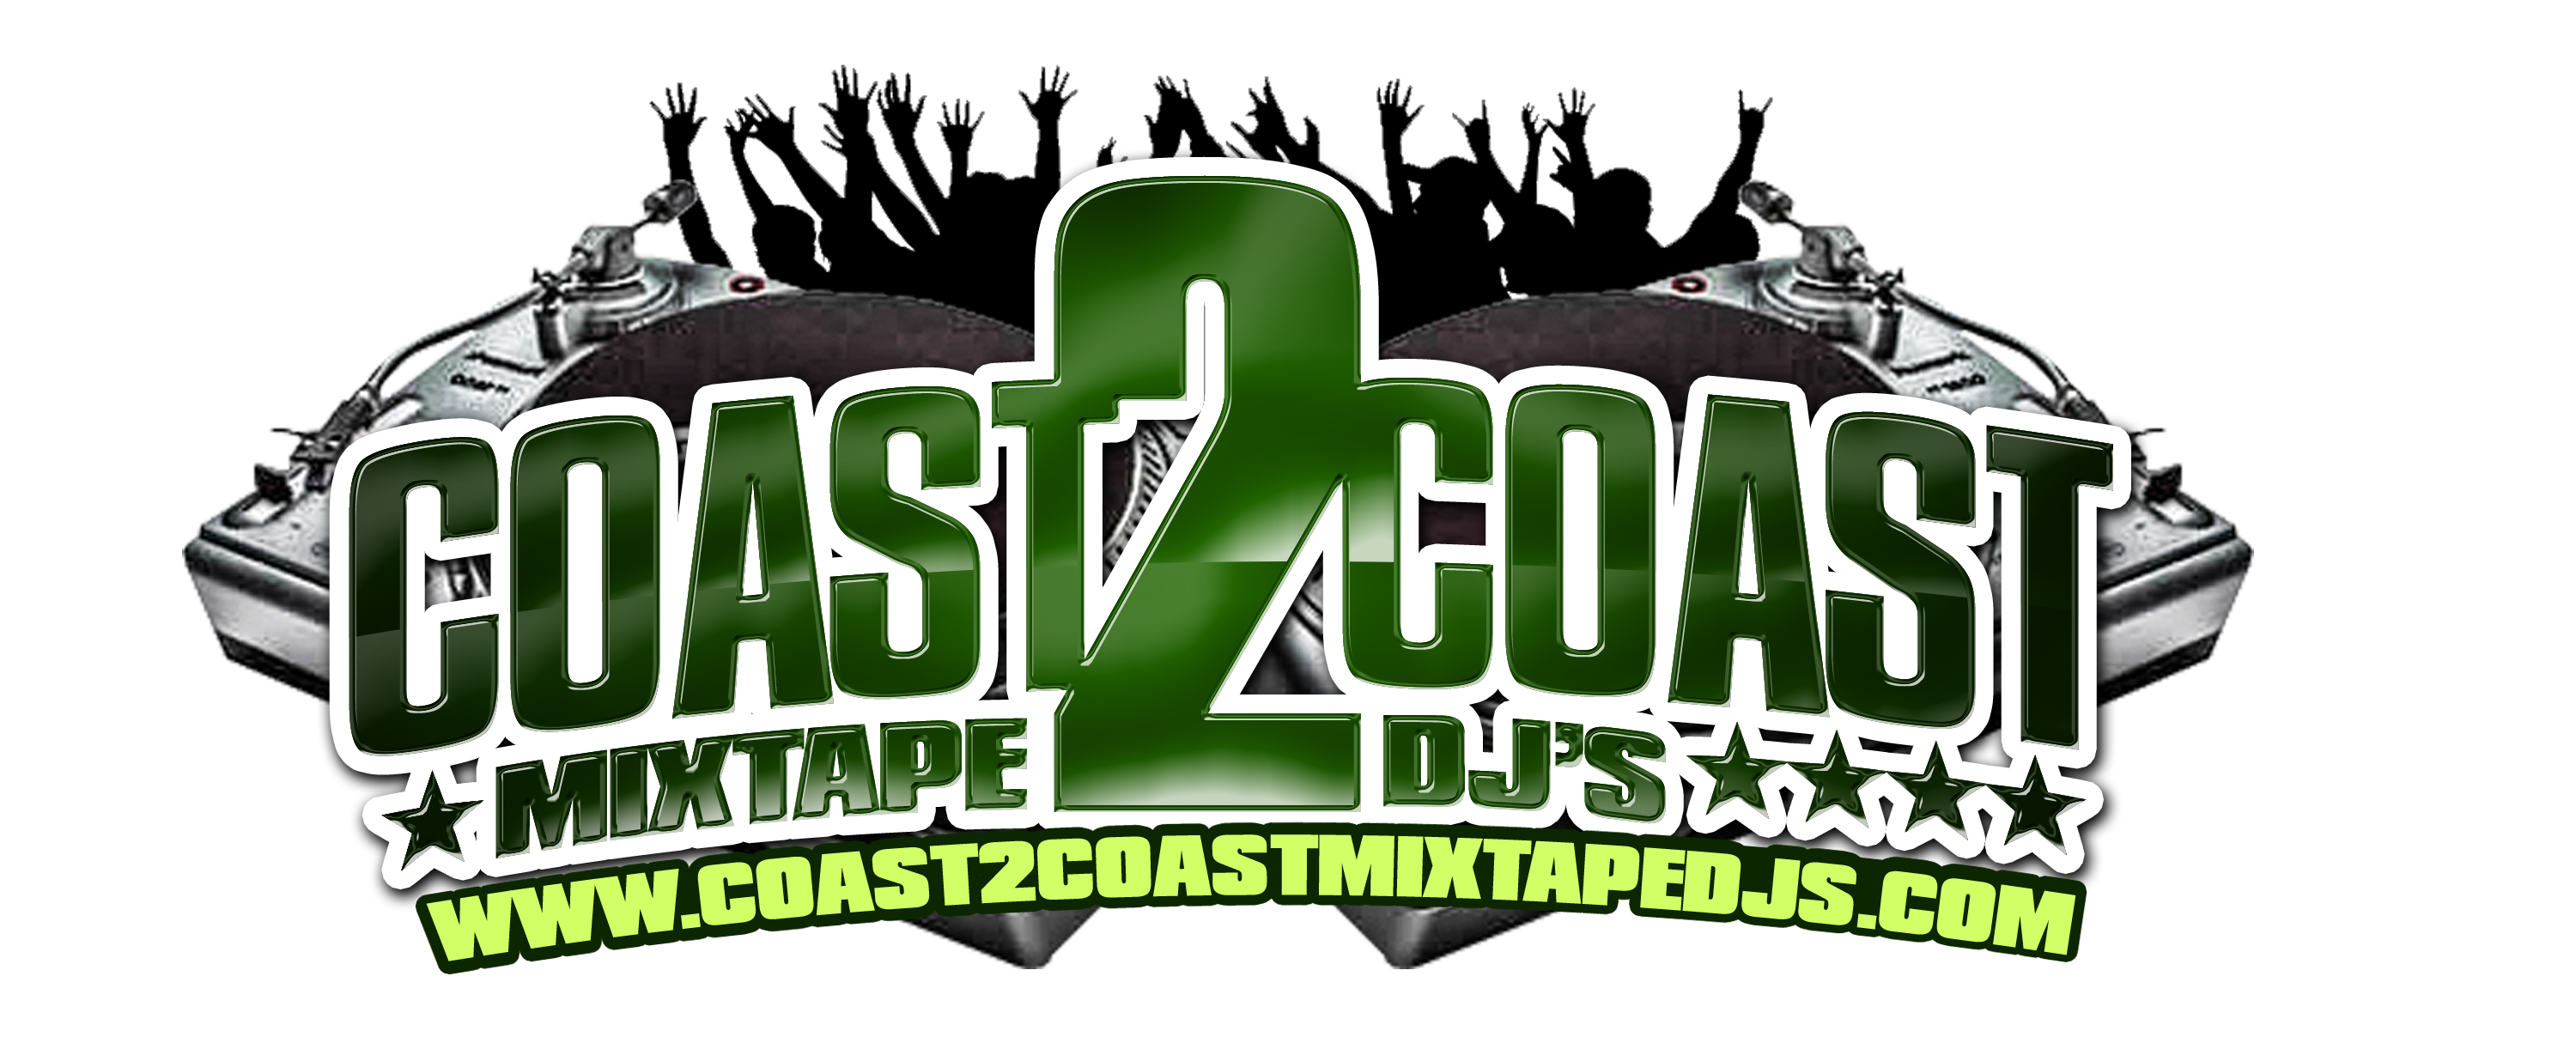 Coast 2 Coast Mixtapes Releases Volume 100 of the Most Downloaded